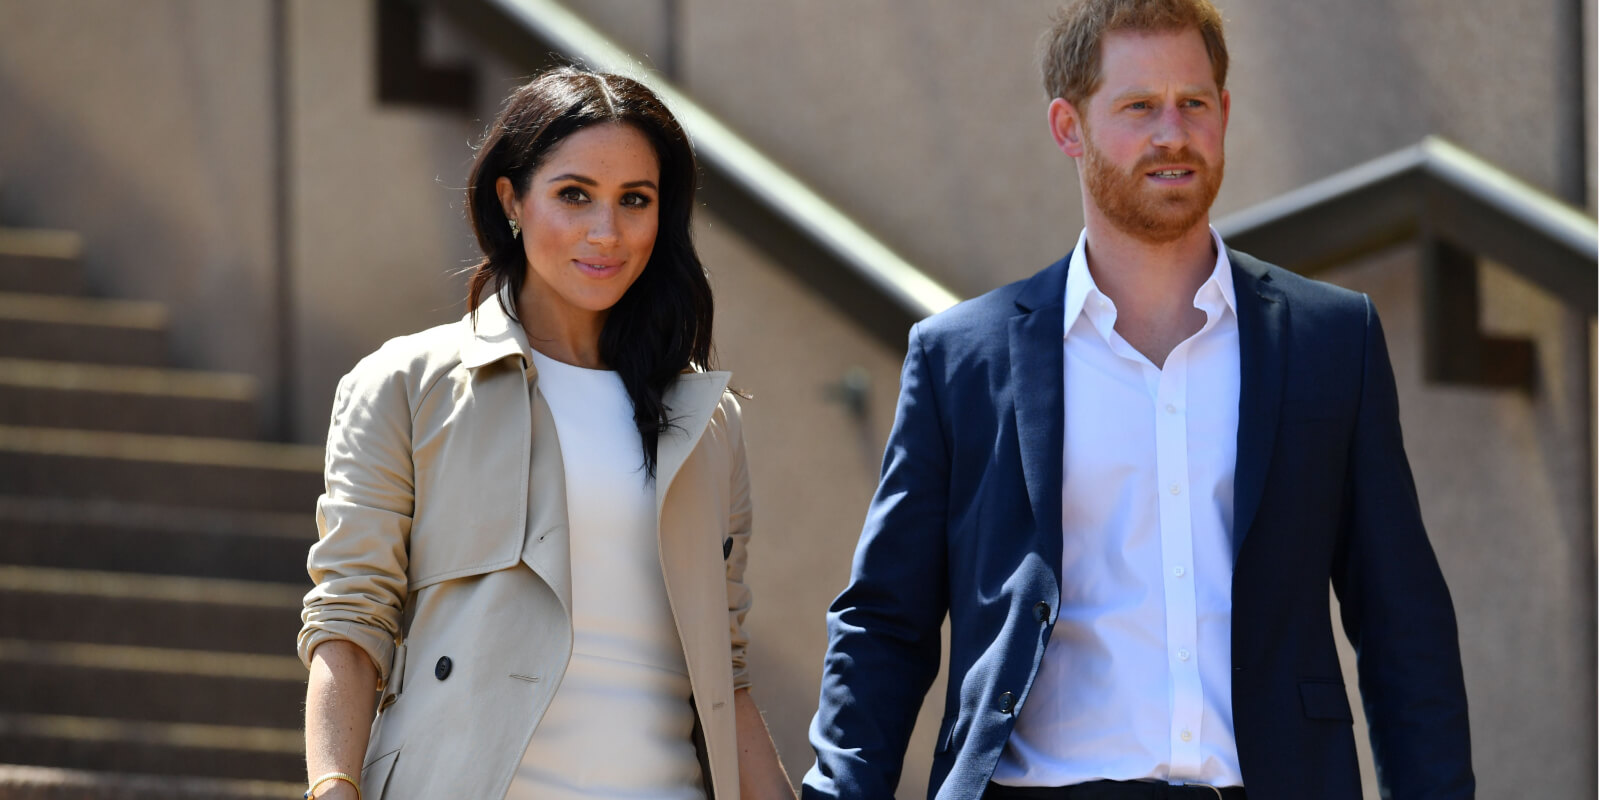 Meghan Markle and Prince Harry called irrelevant by Princess Diana's butler.